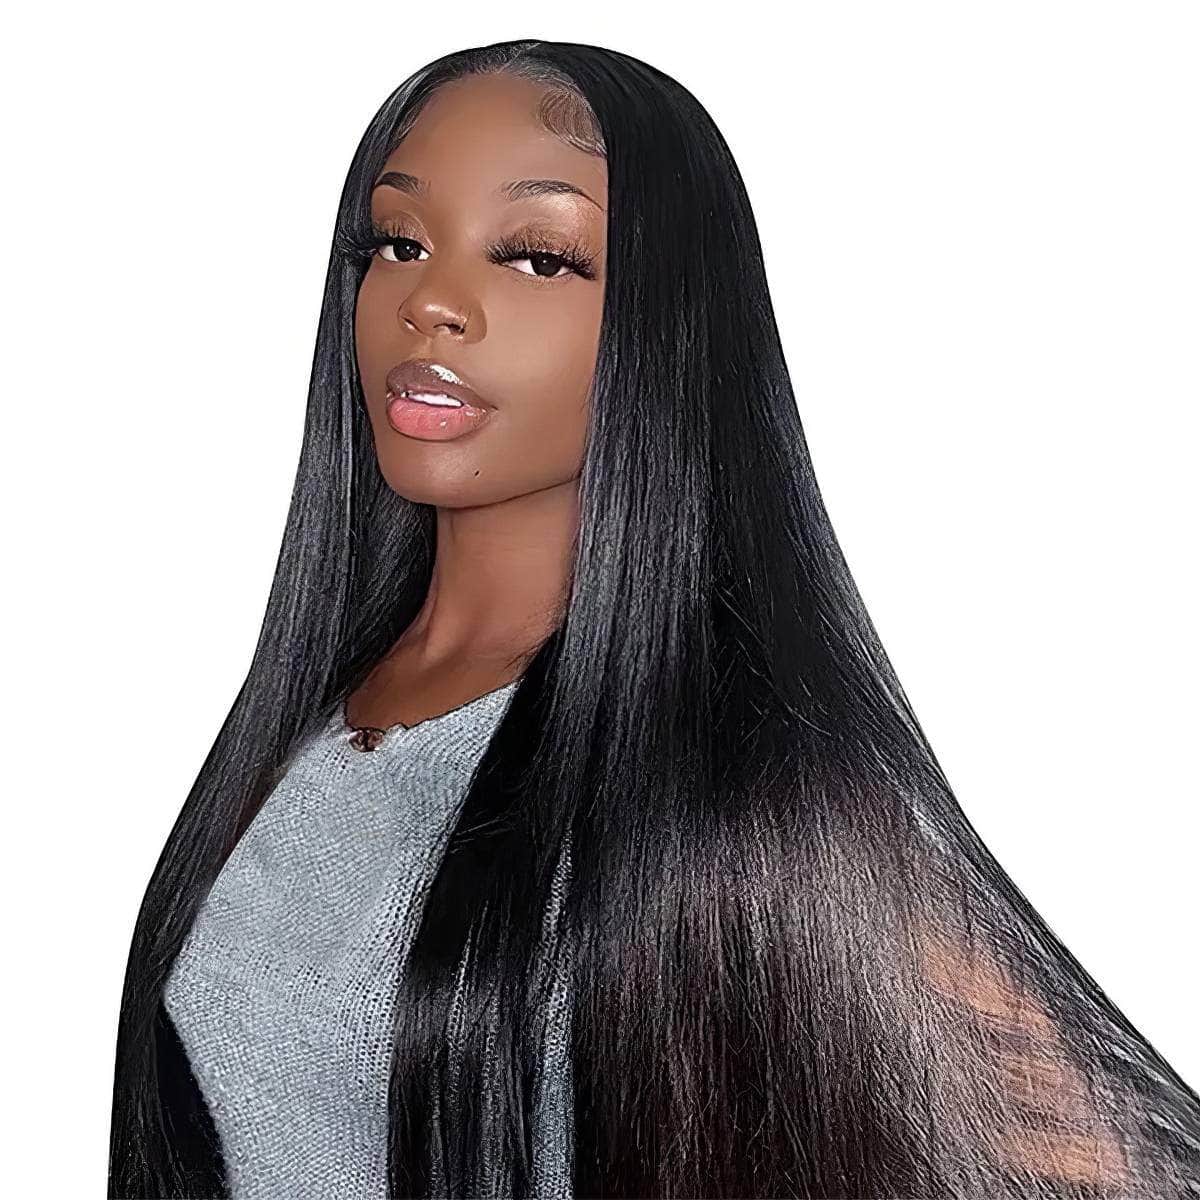 Brazilian Straight Human Hair Wig - Glueless, Ready To Wear, 6x4 Lace Front Pre Cut, No Glue HD Wig 12inches